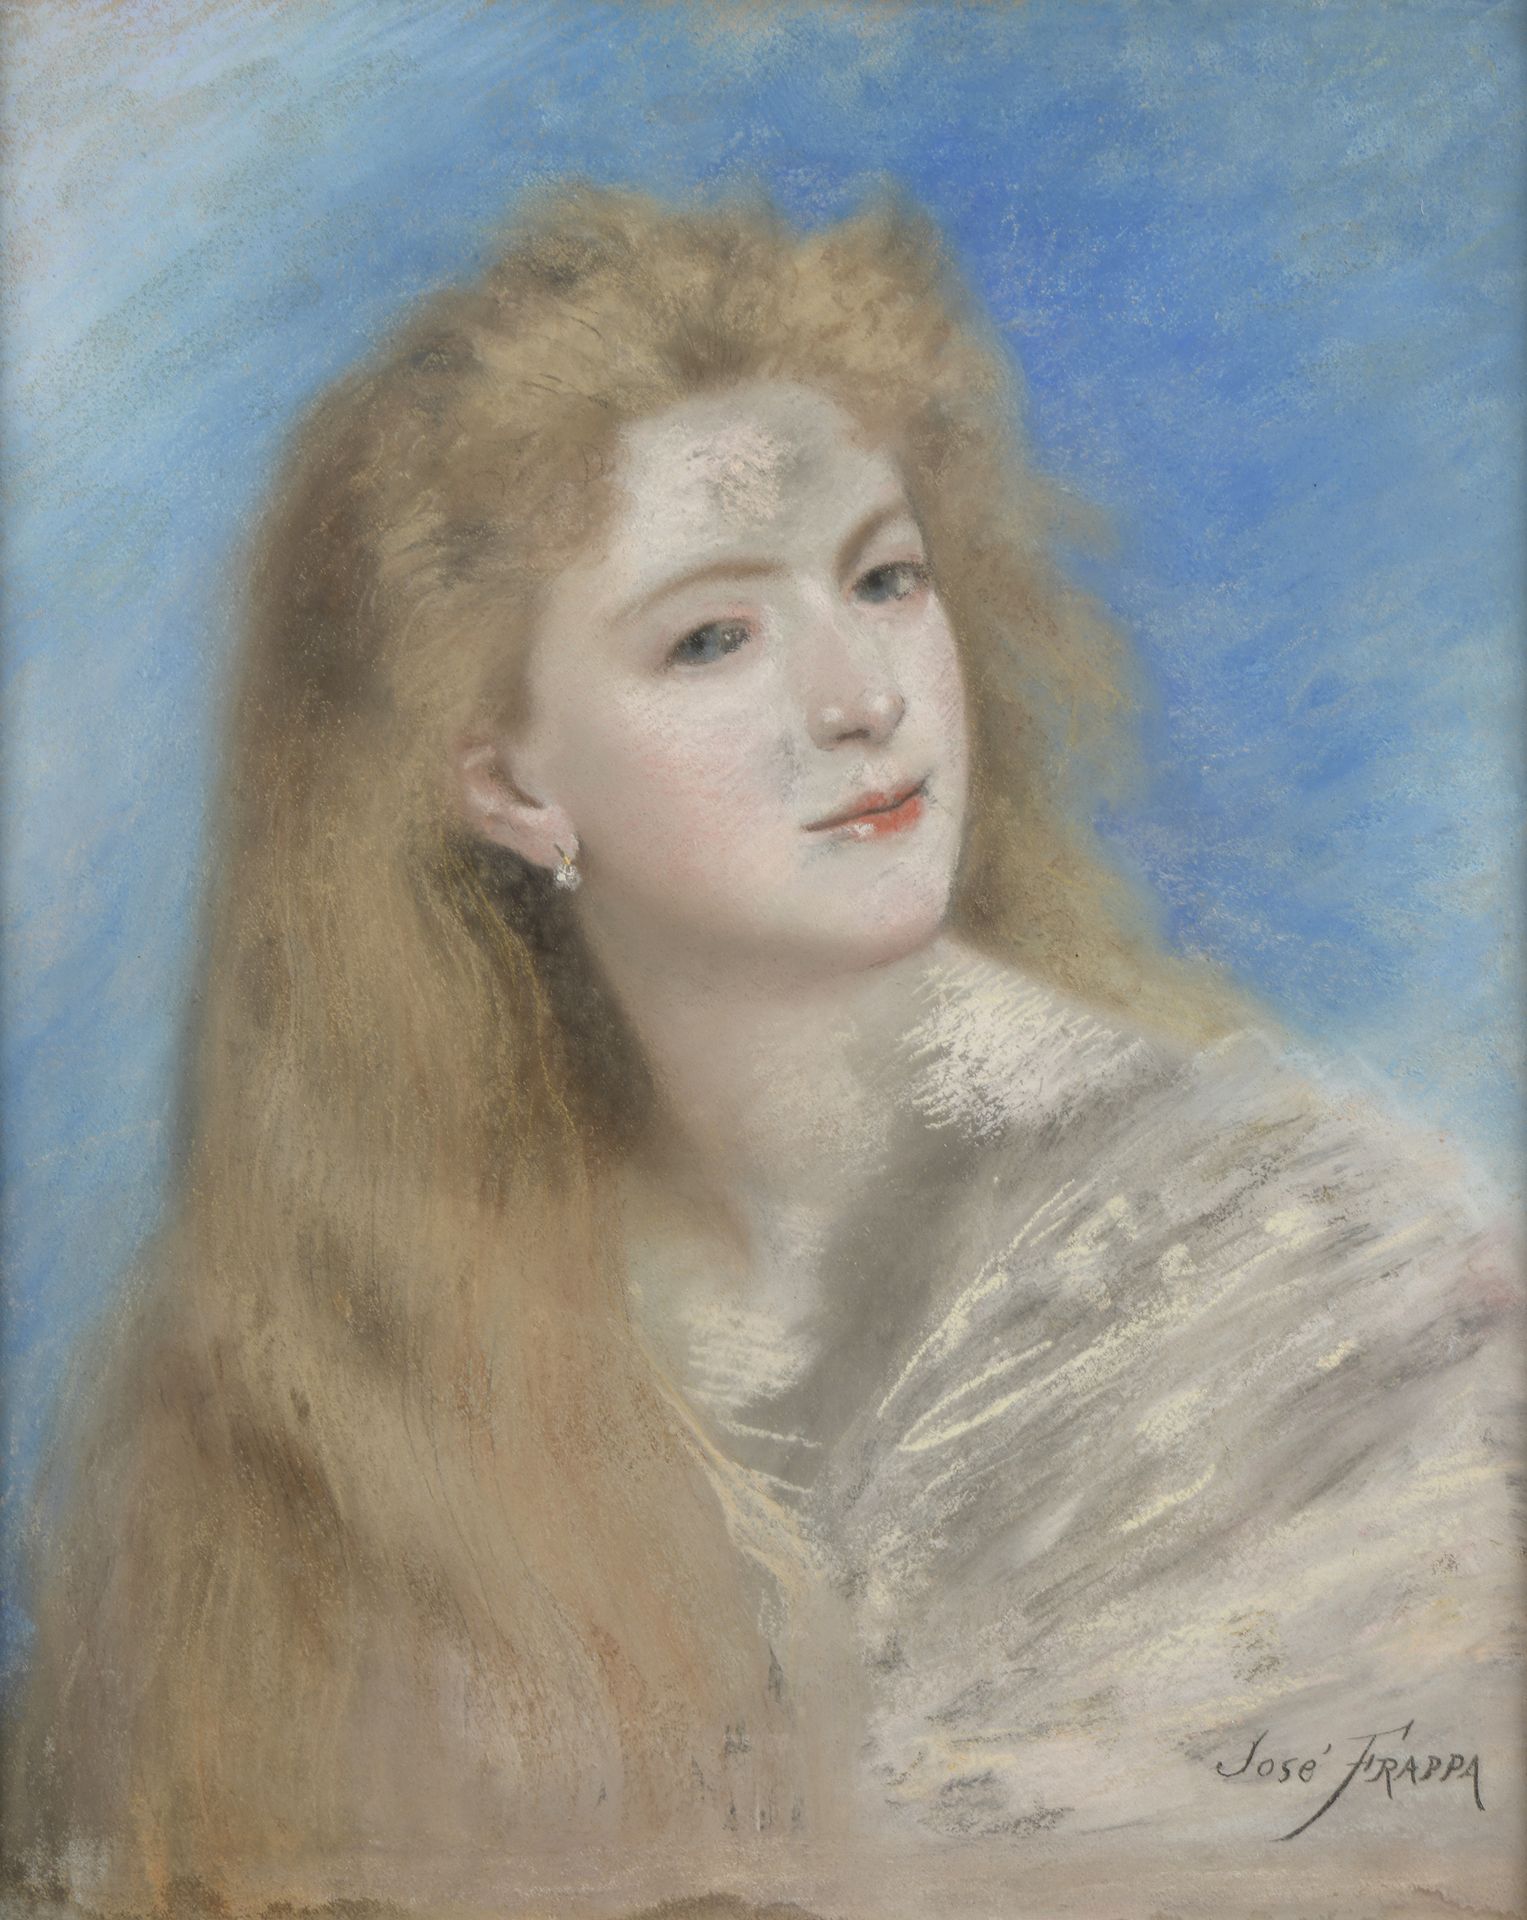 Null José FRAPPA (1854-1904)

Portrait of a young woman

Pastel on paper.

Signe&hellip;